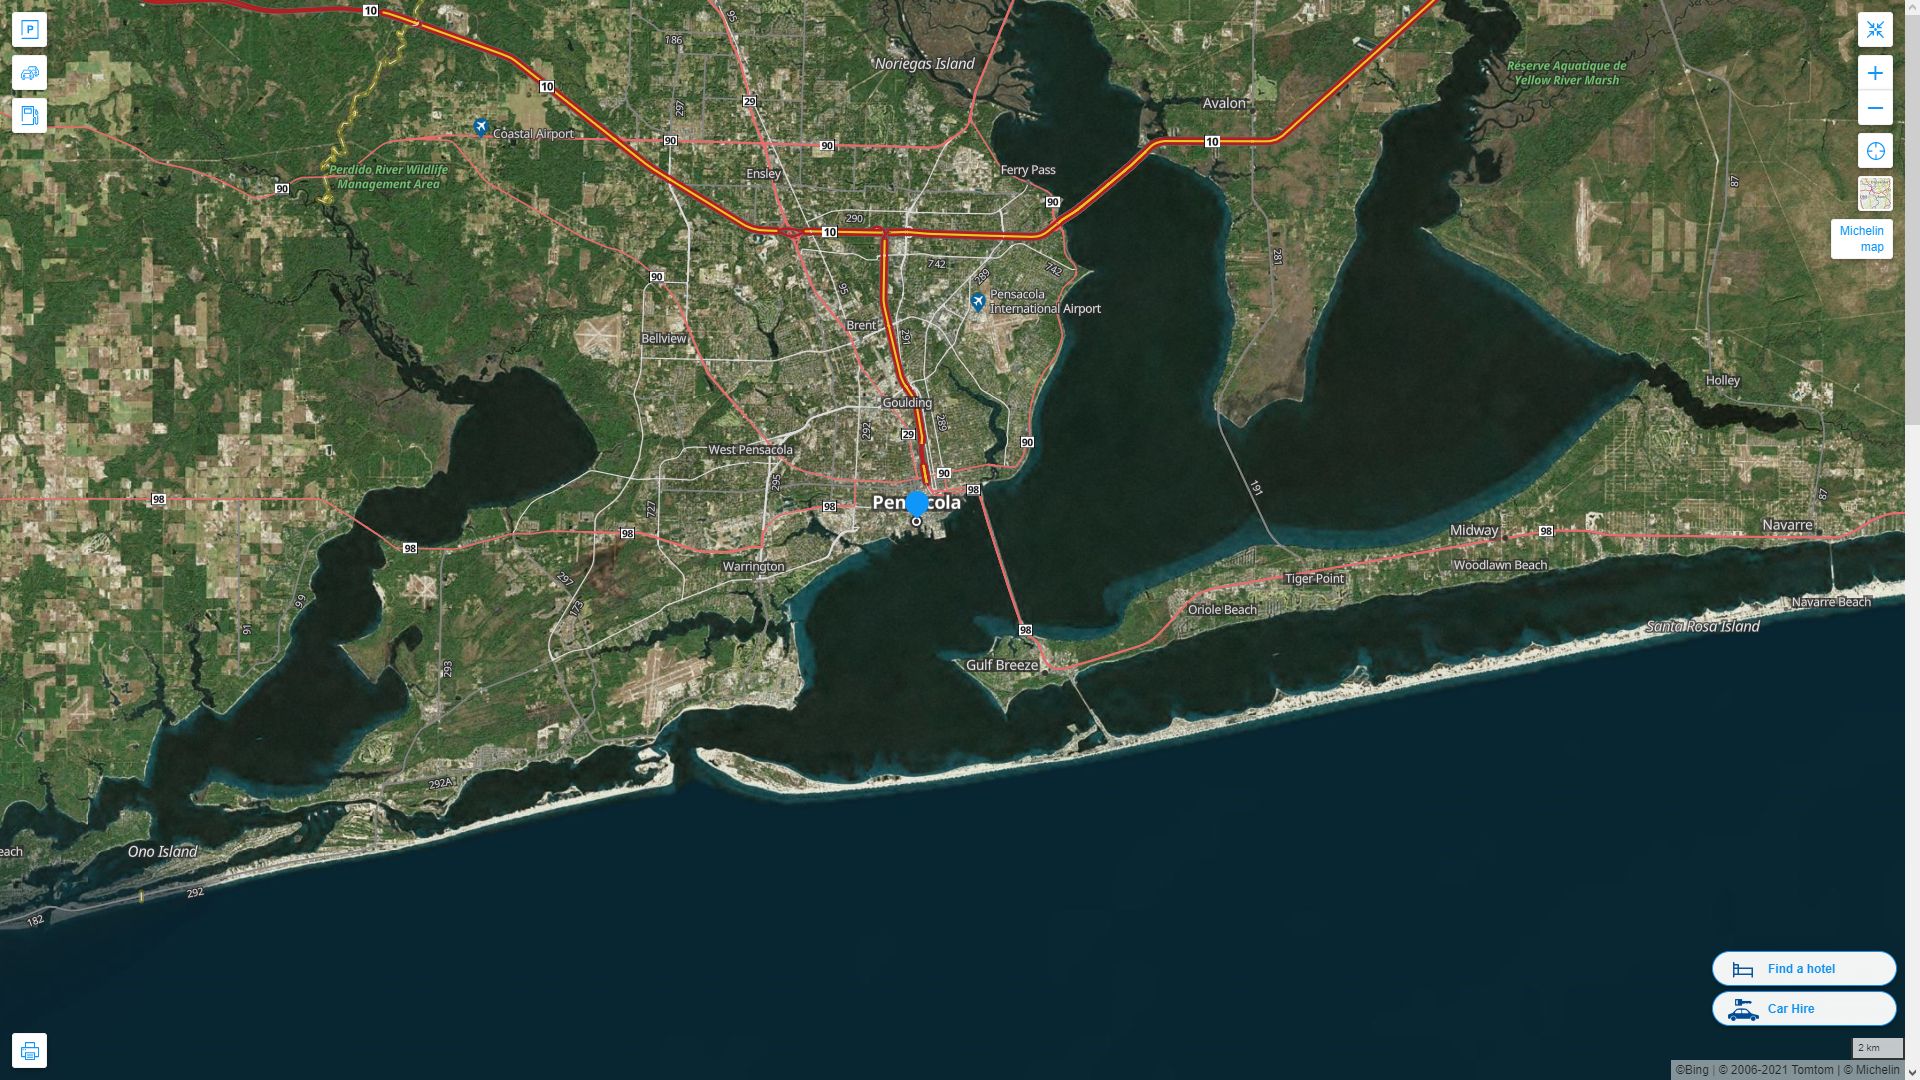 Pensacola Florida Highway and Road Map with Satellite View